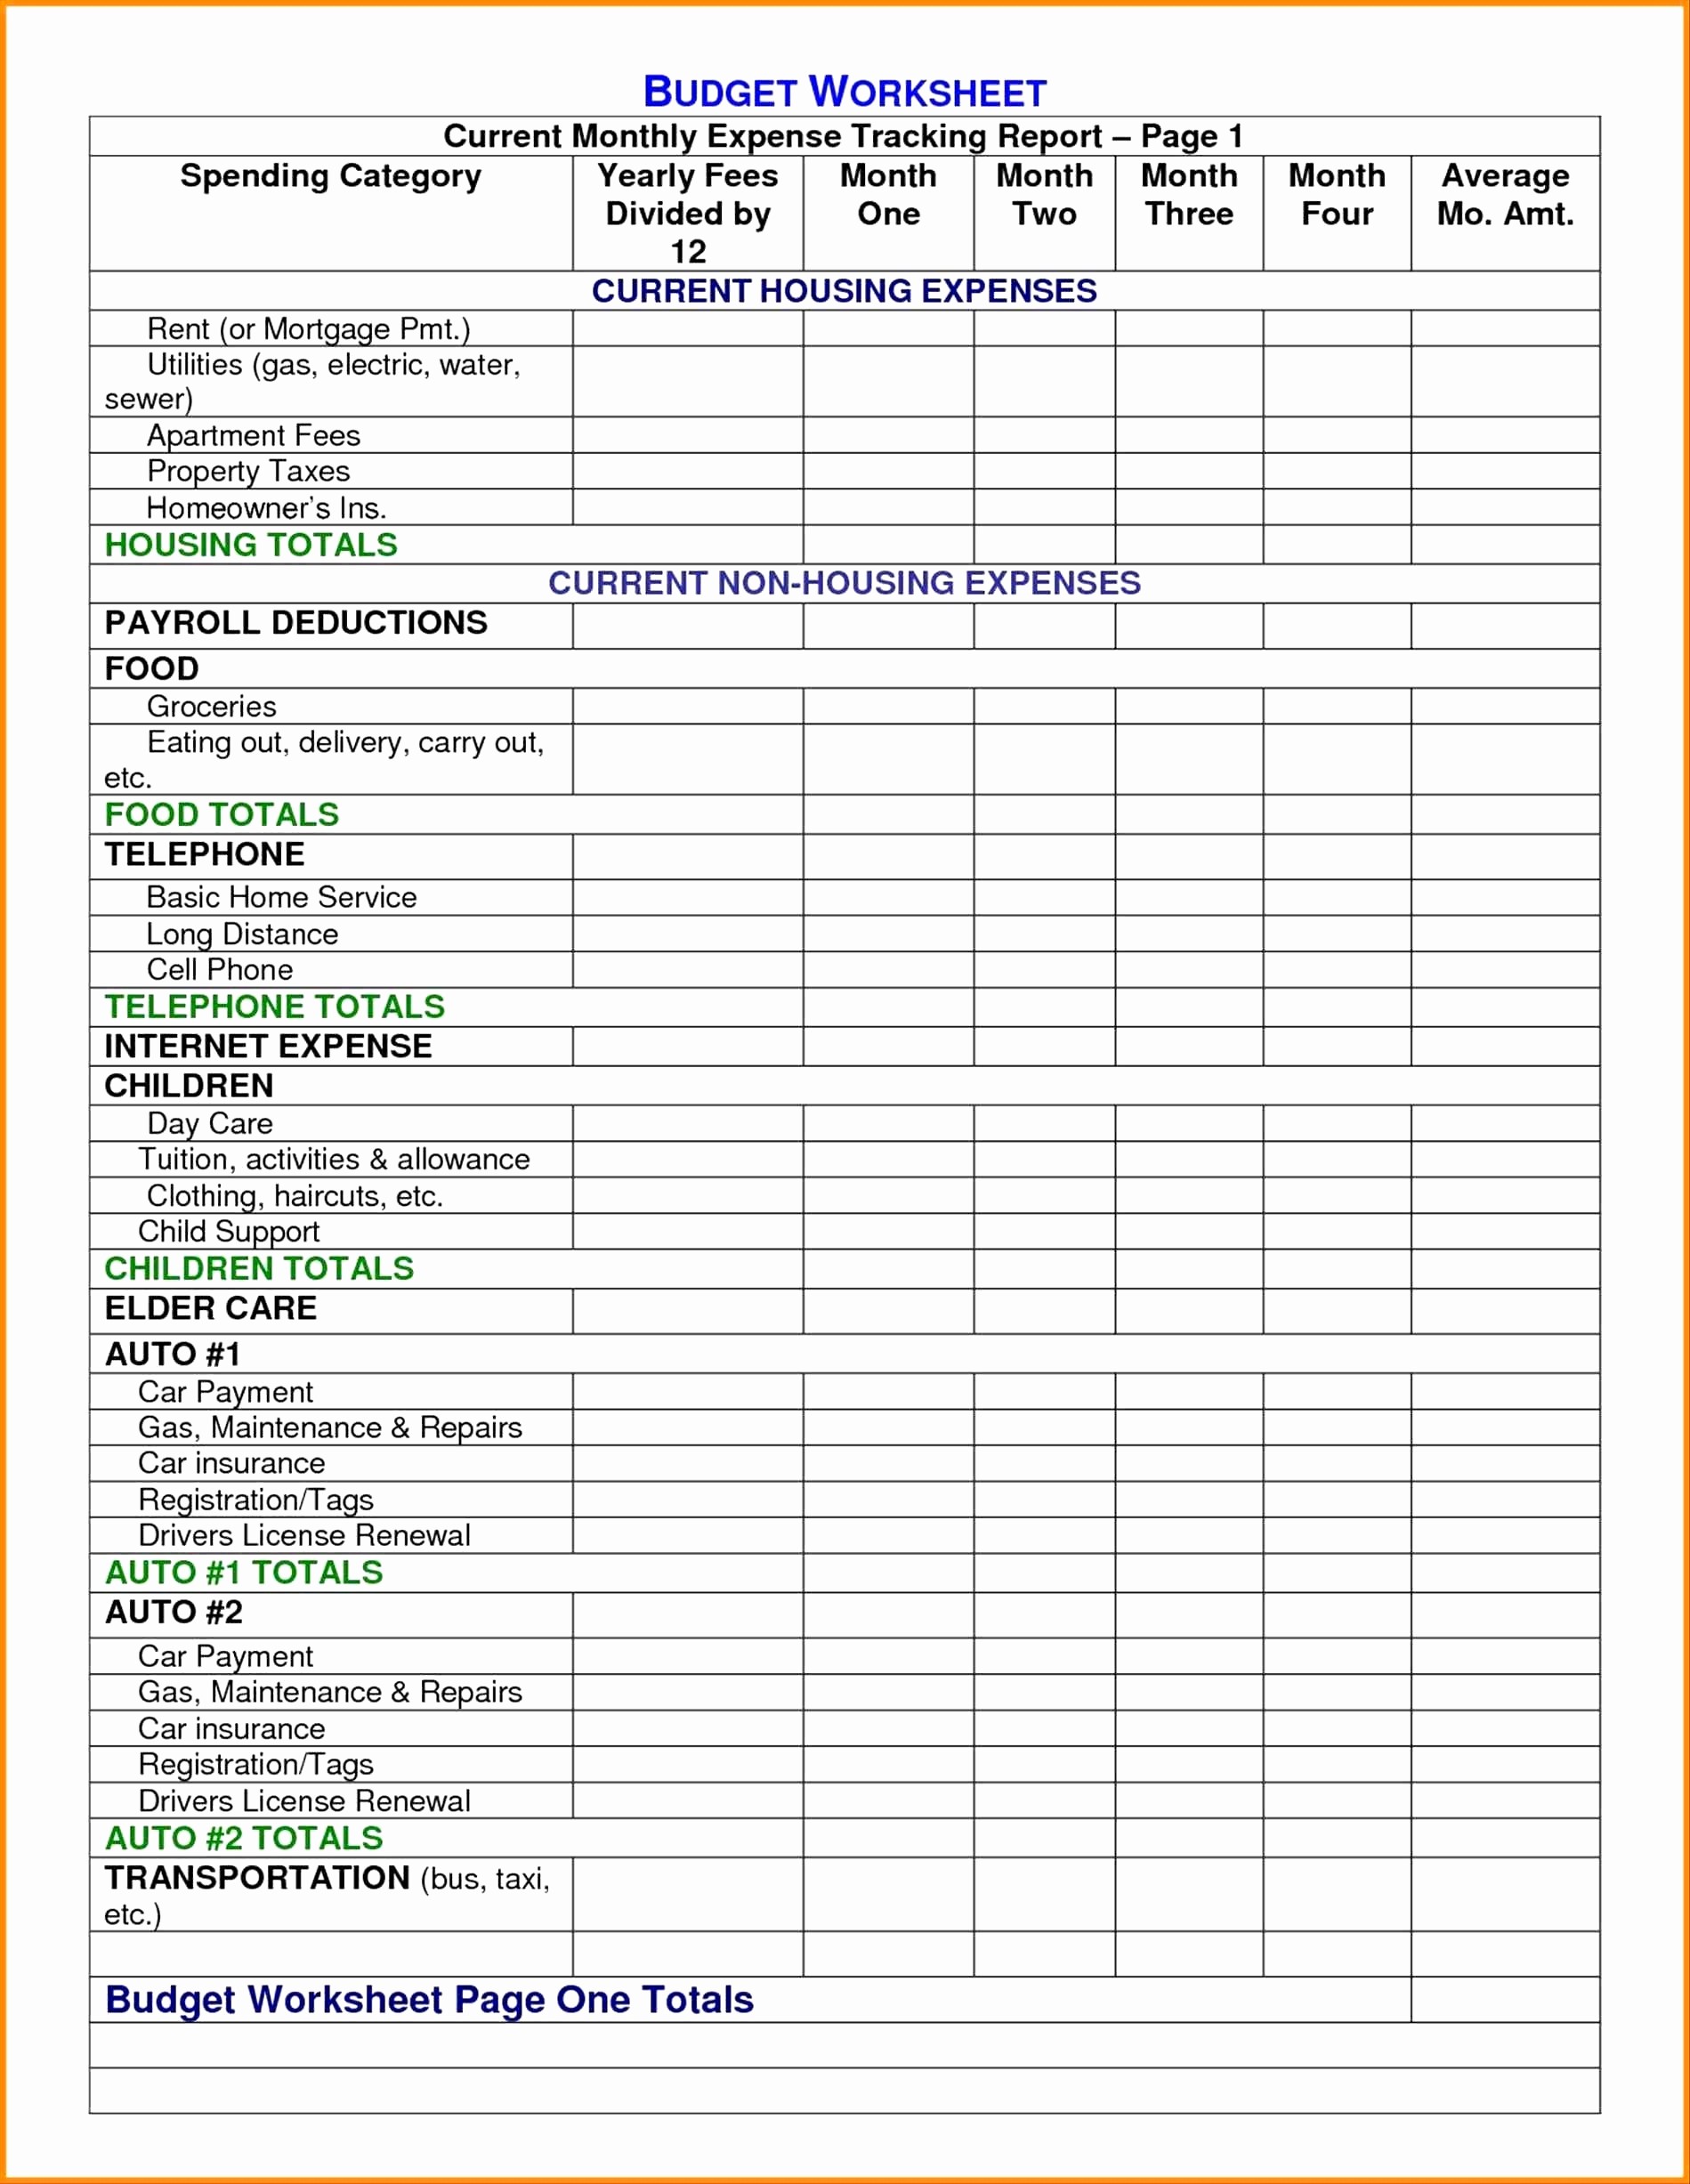 Wedding Venue Cost Comparison Spreadsheet Awesome Document